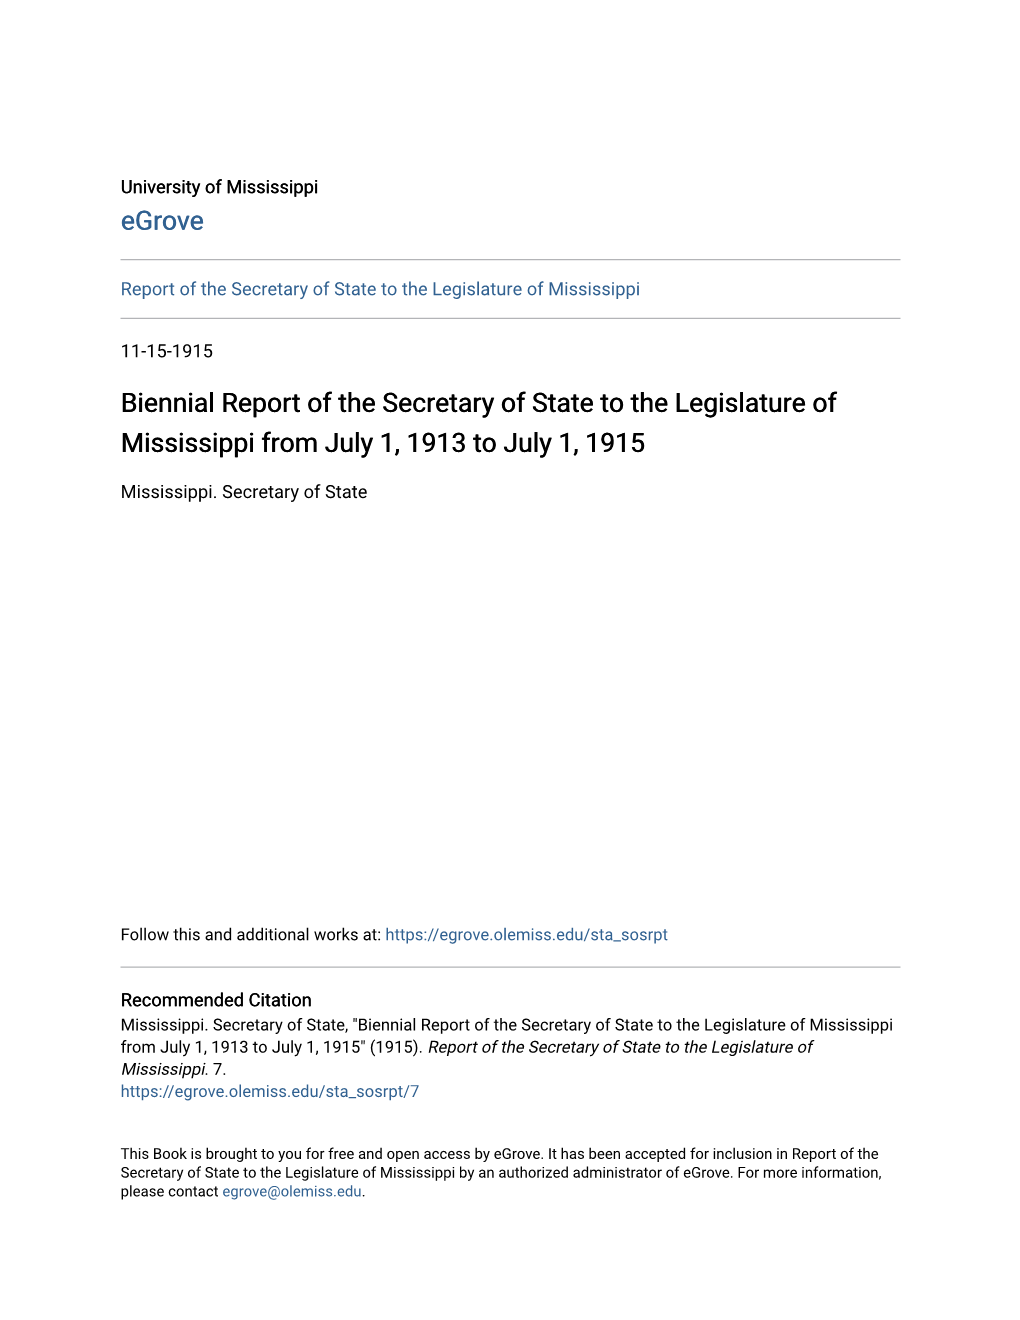 Biennial Report of the Secretary of State to the Legislature of Mississippi from July 1, 1913 to July 1, 1915